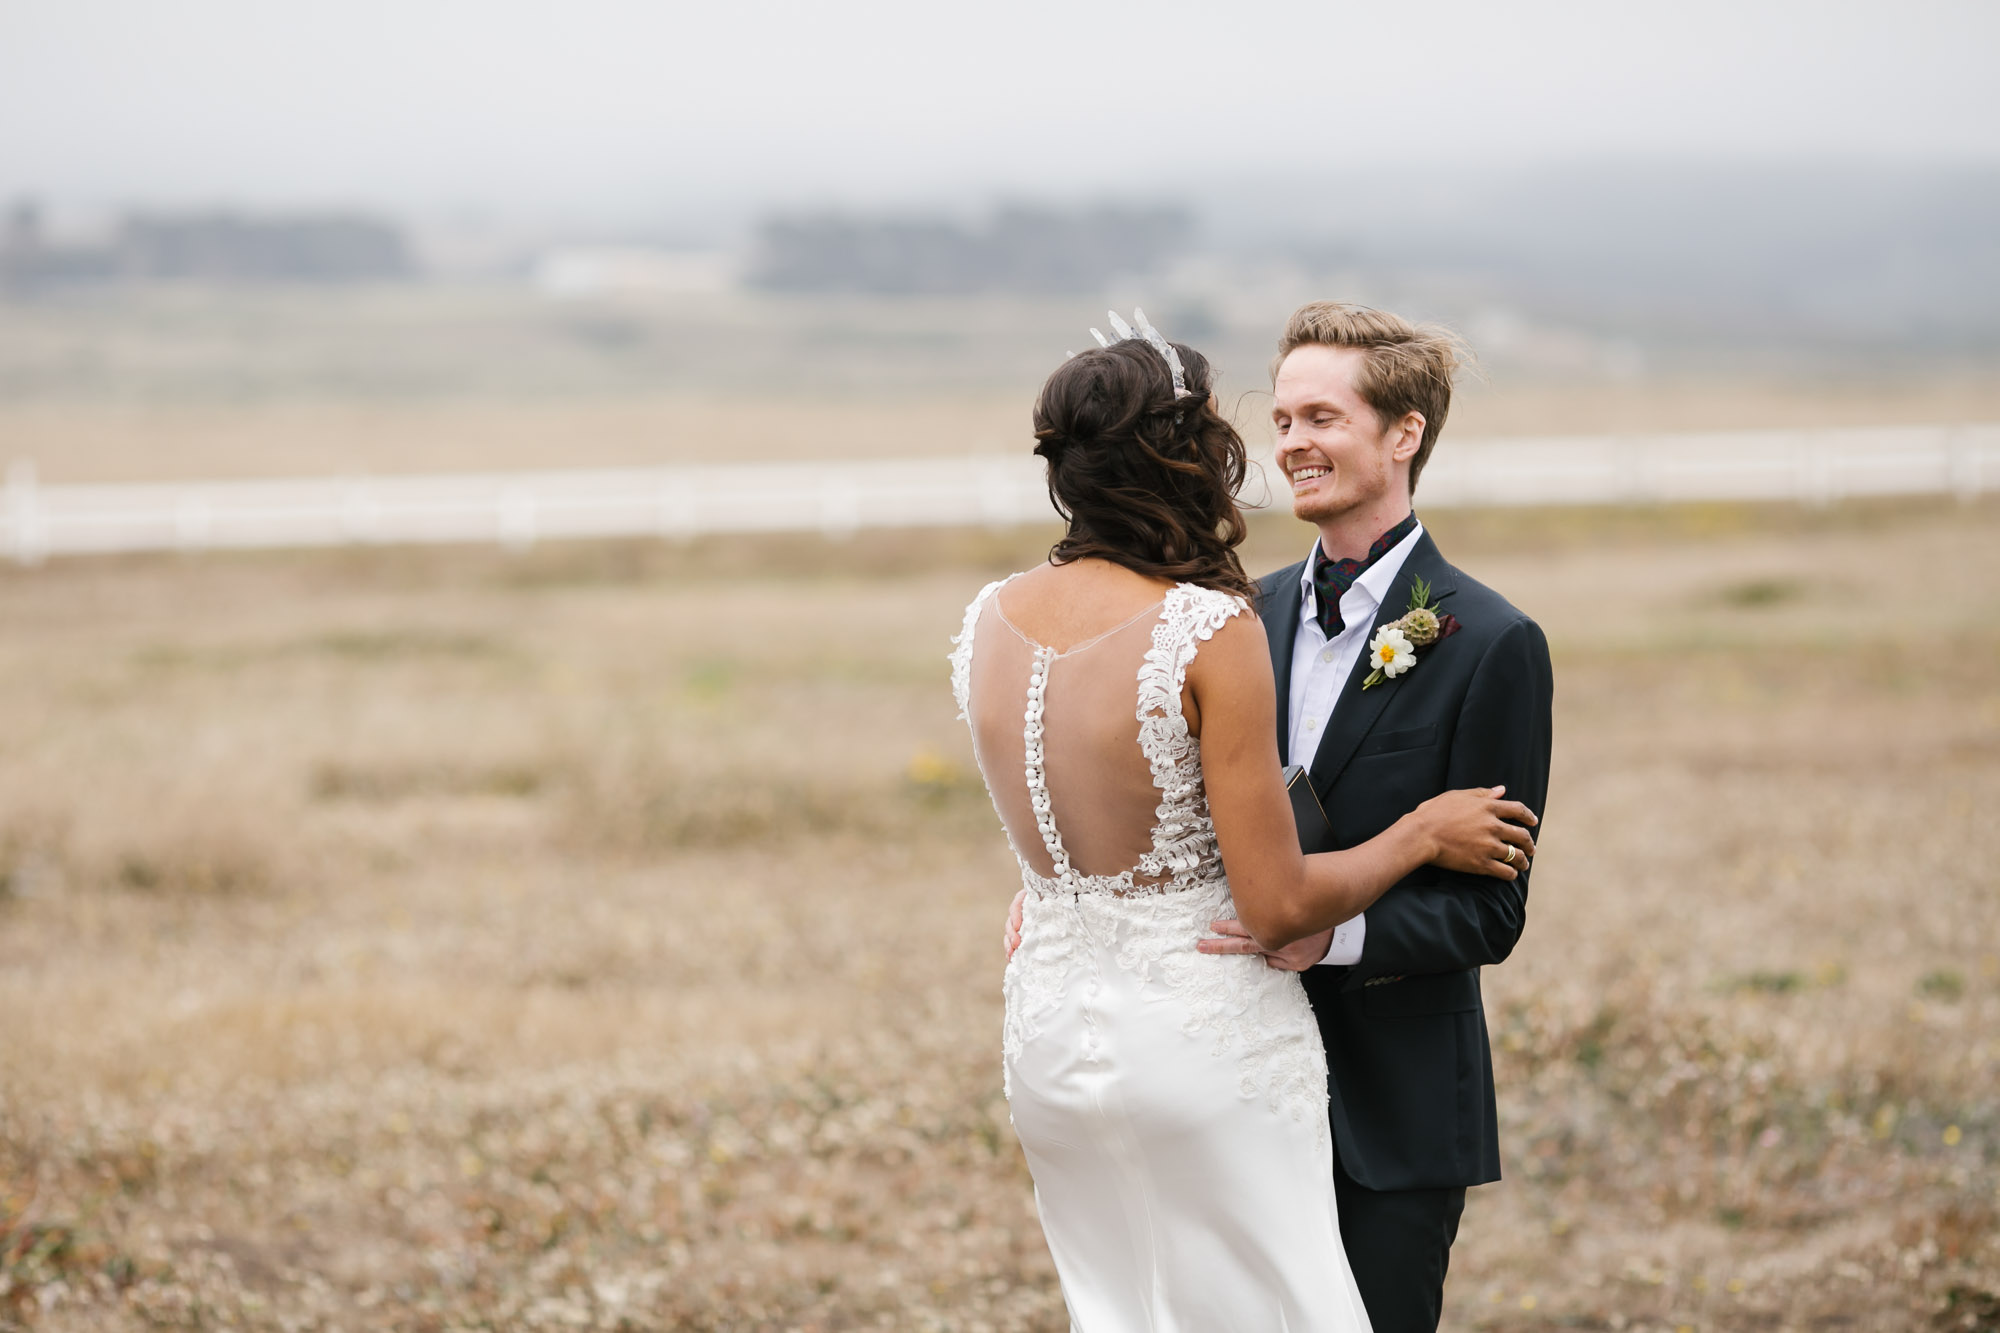 Groom smiles at his bride in a field on the California coast